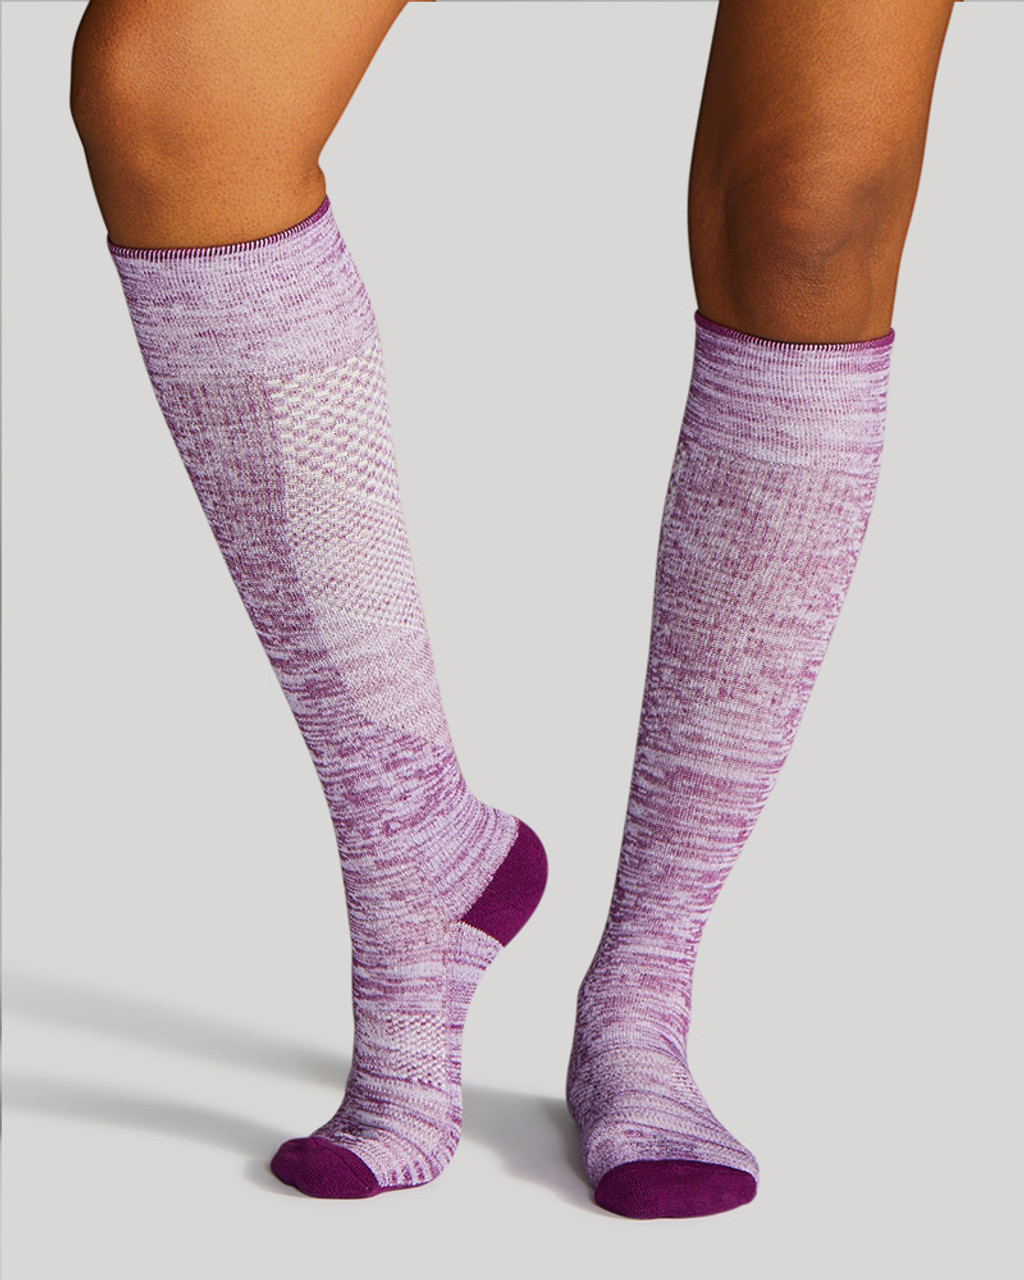 Easy-On Compression Socks with Infrared | Women's Over the Calf